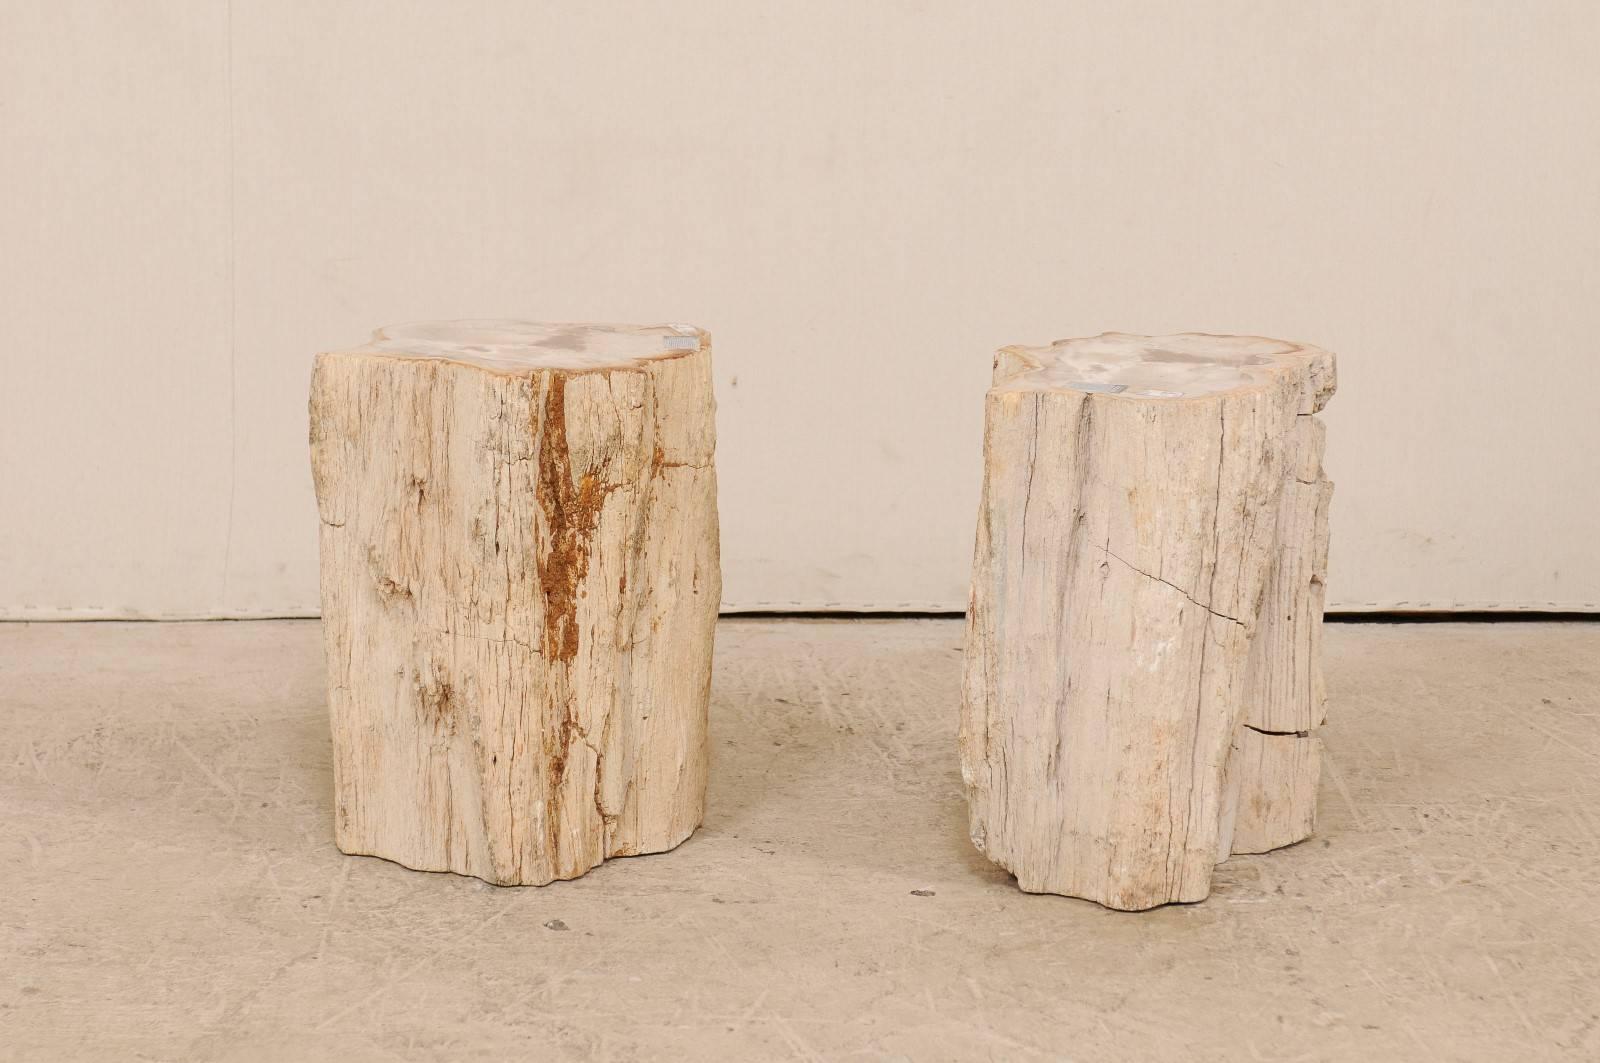 Pair of Live-Edge Petrified Wood Drink Tables With Polished Tops, Light Colored 1